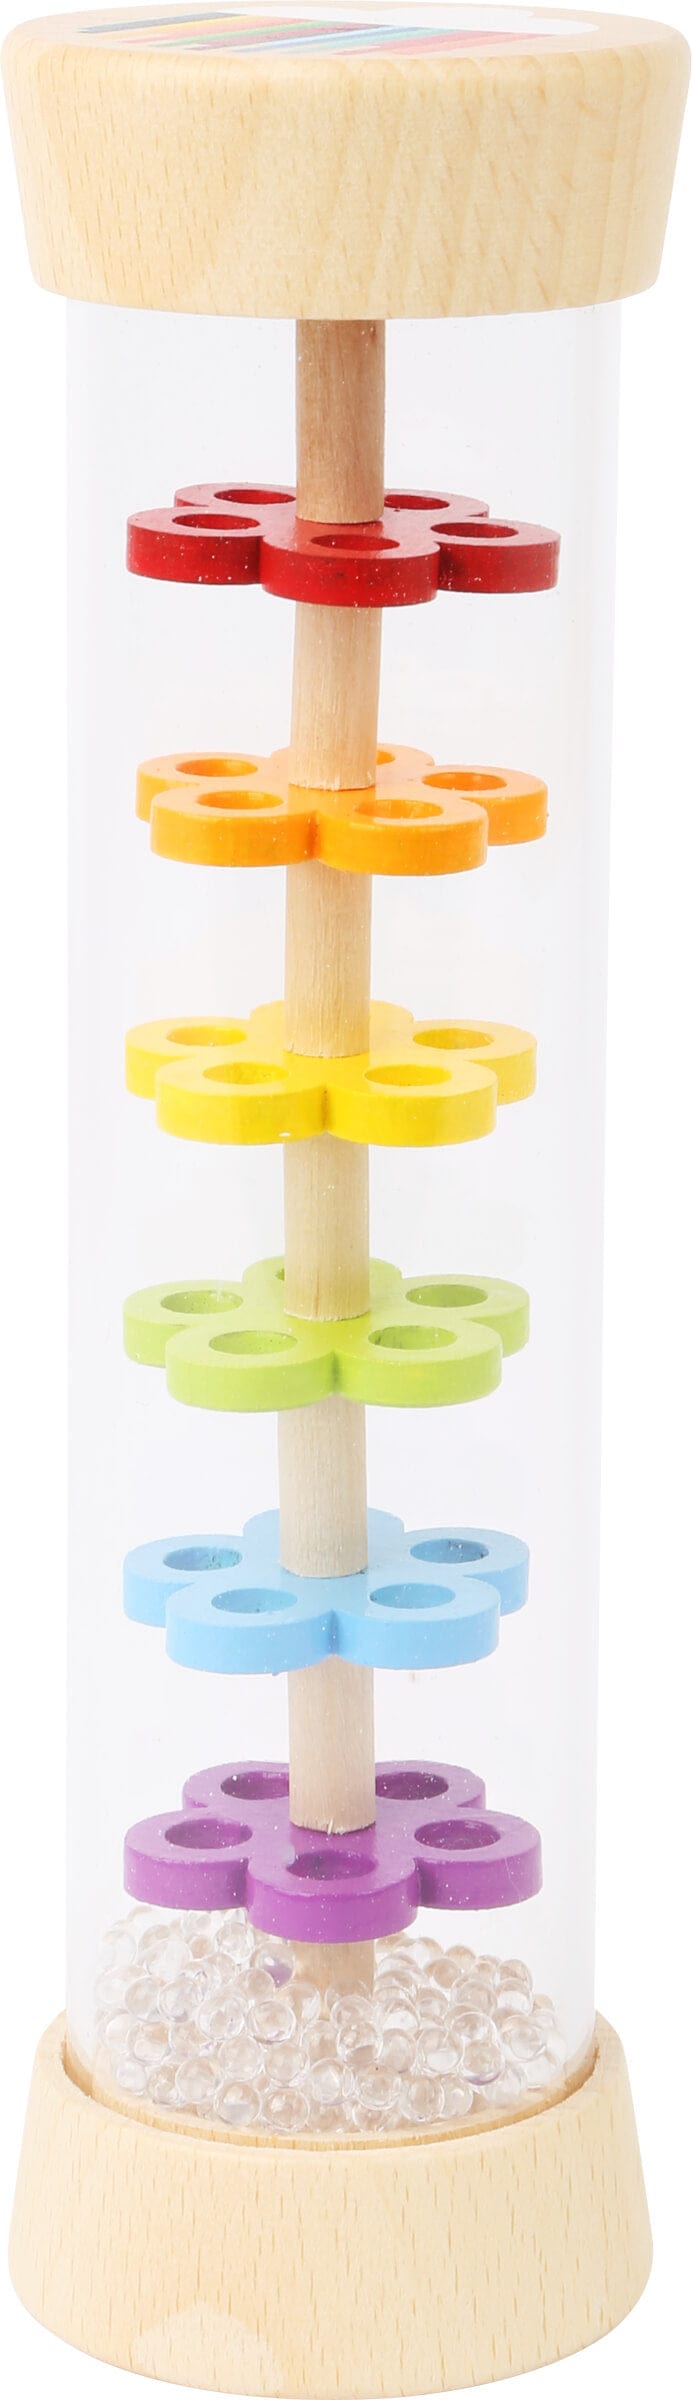 Small Foot wooden colourful Rainmaker musical toy